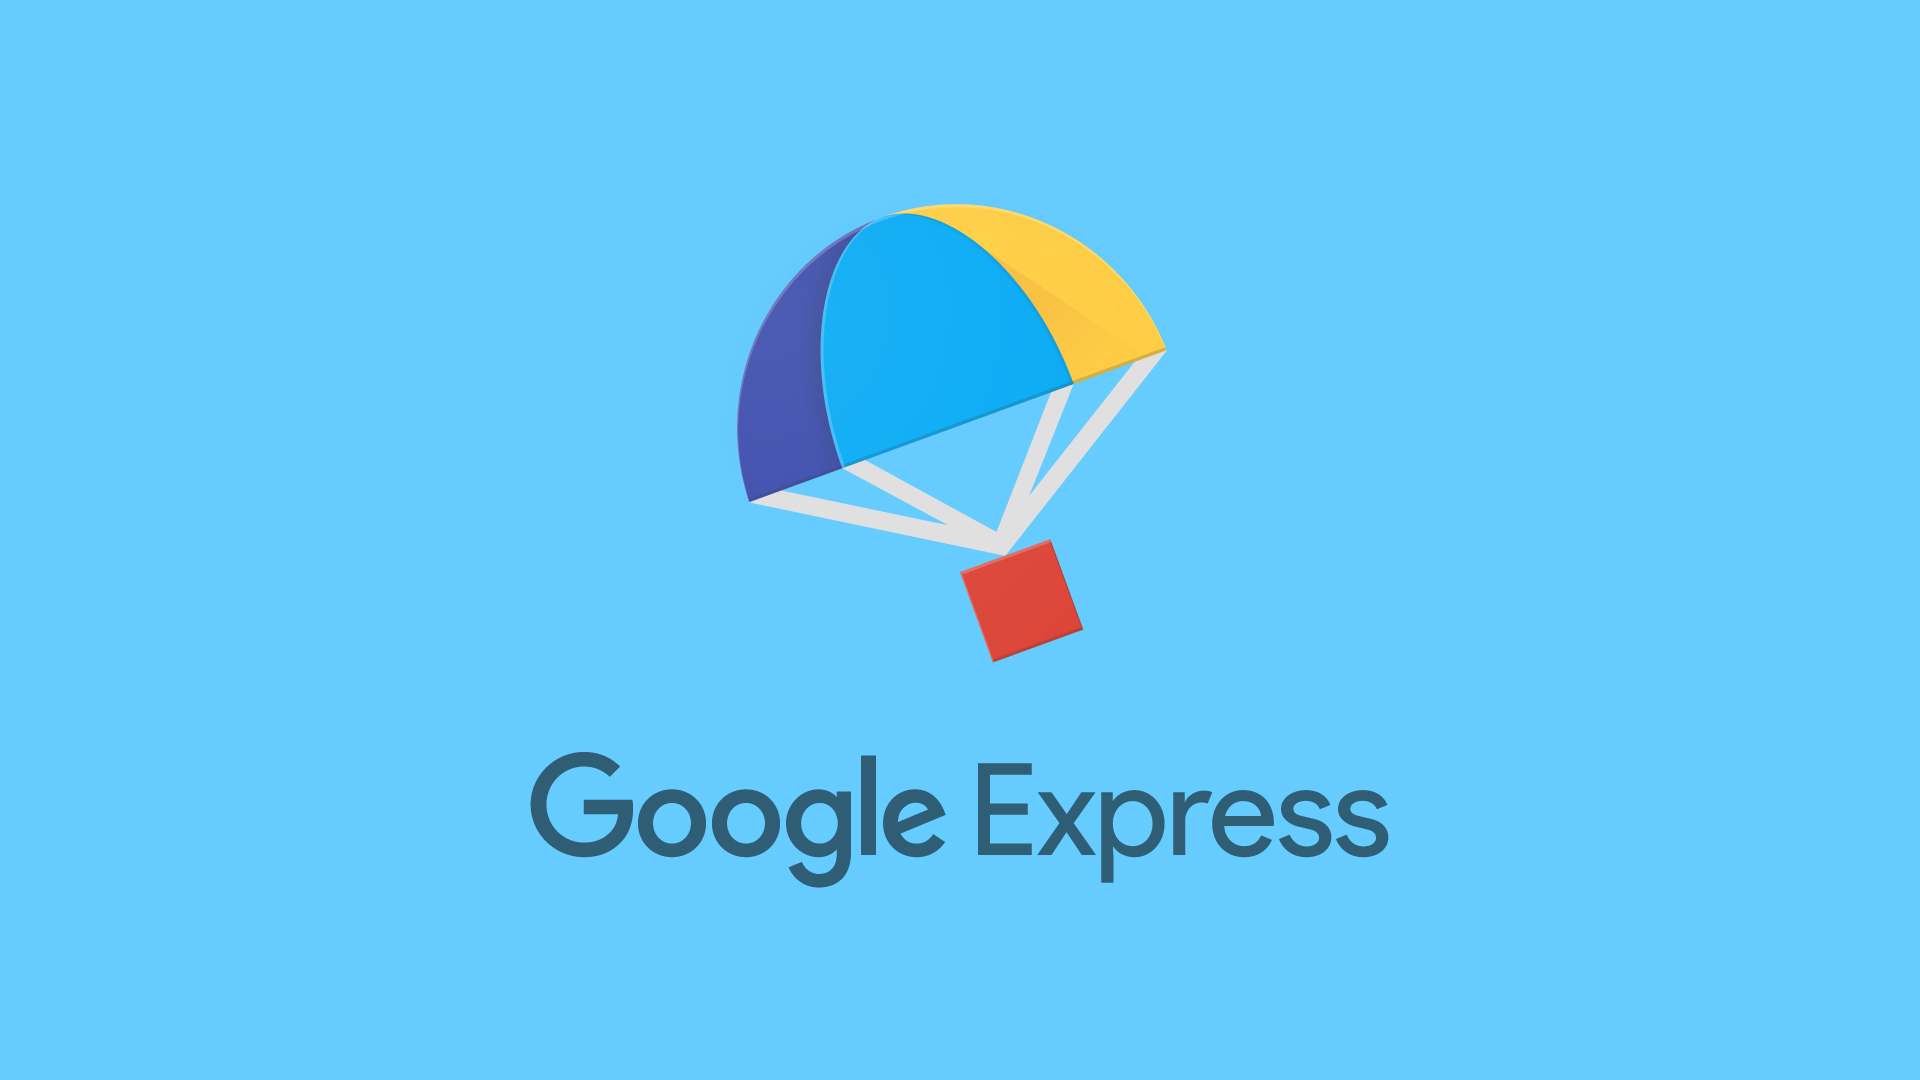 The logo for Google's shopping experience, Google Express.